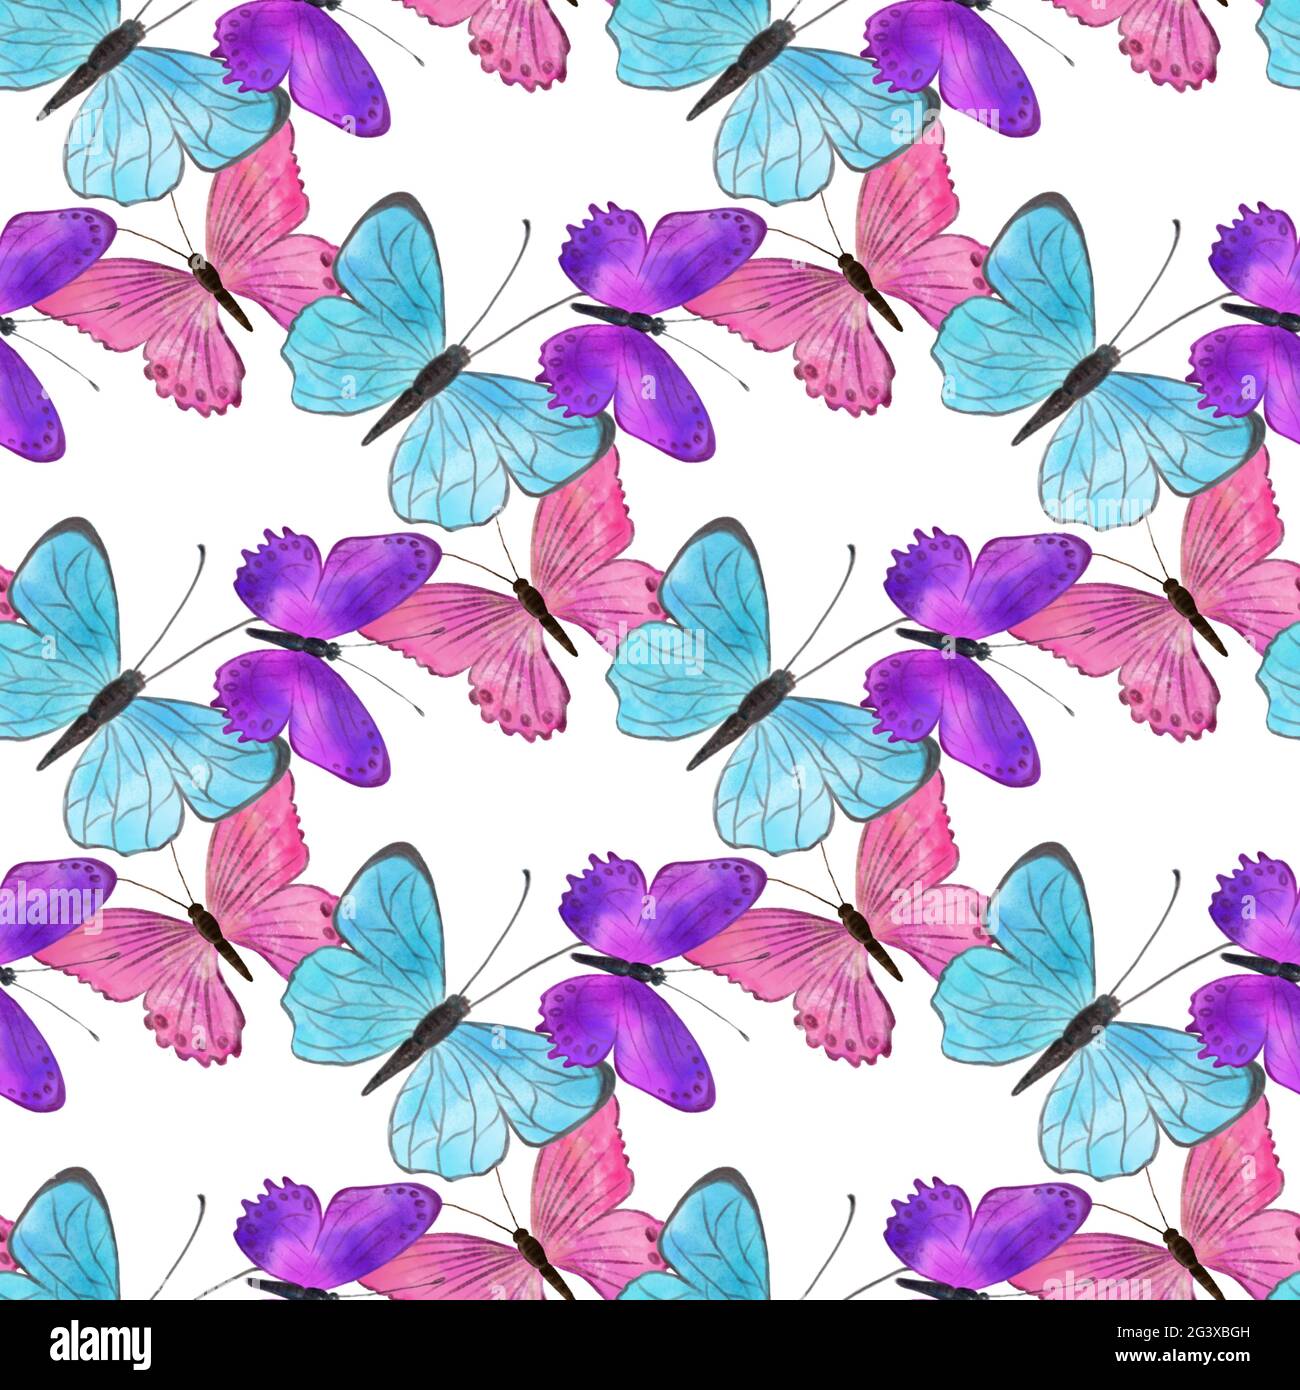 Watercolor butterflies hand drawn seamless pattern. High quality  illustration For fabric, wallpaper, textile, any surface design Stock Photo  - Alamy